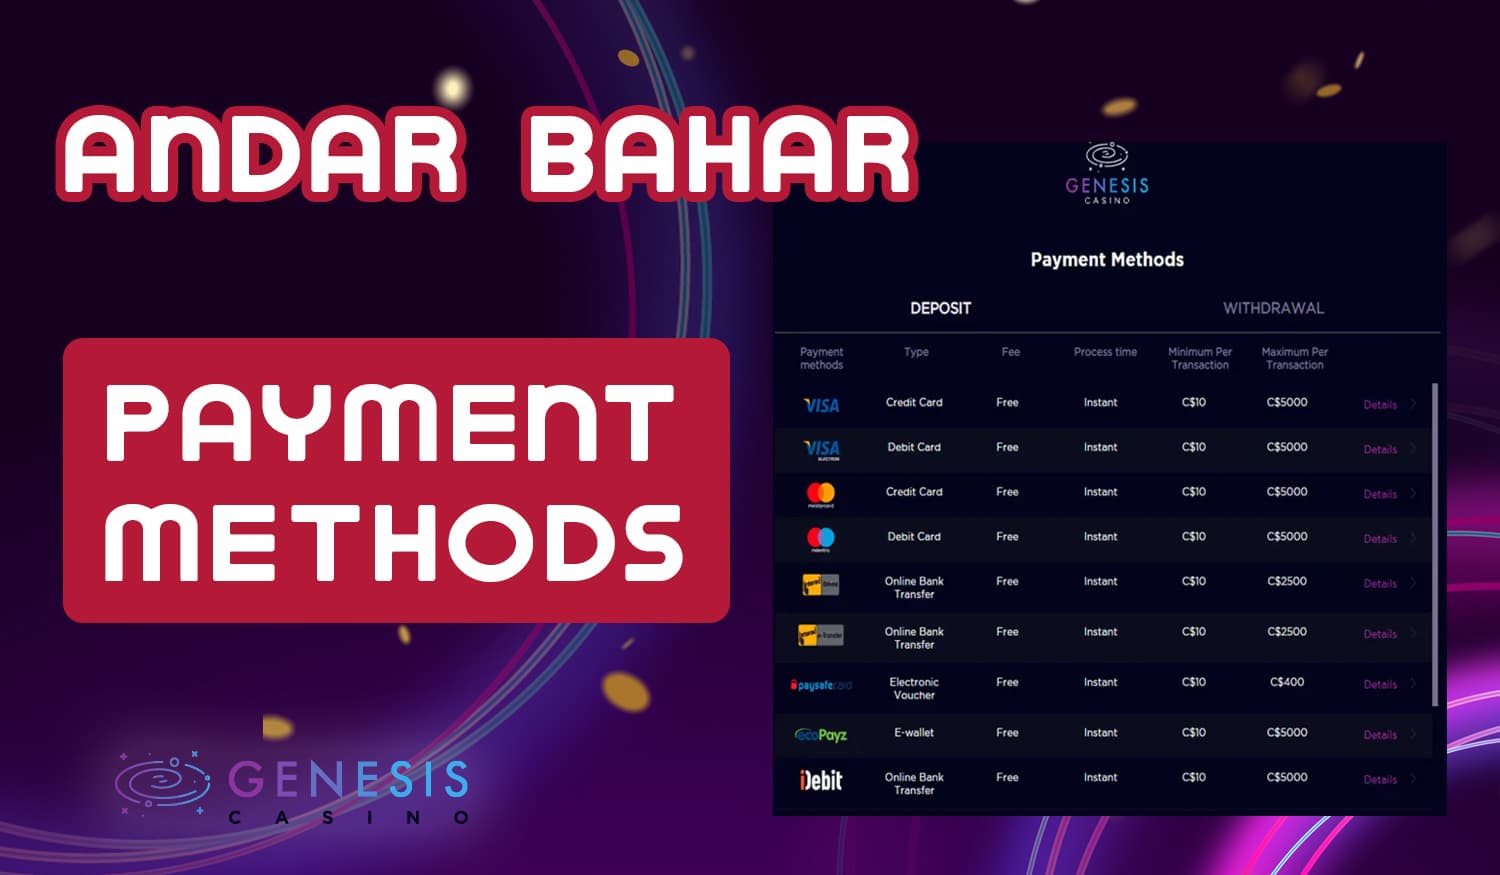 Payment methods for deposits and withdrawals from Genesis site